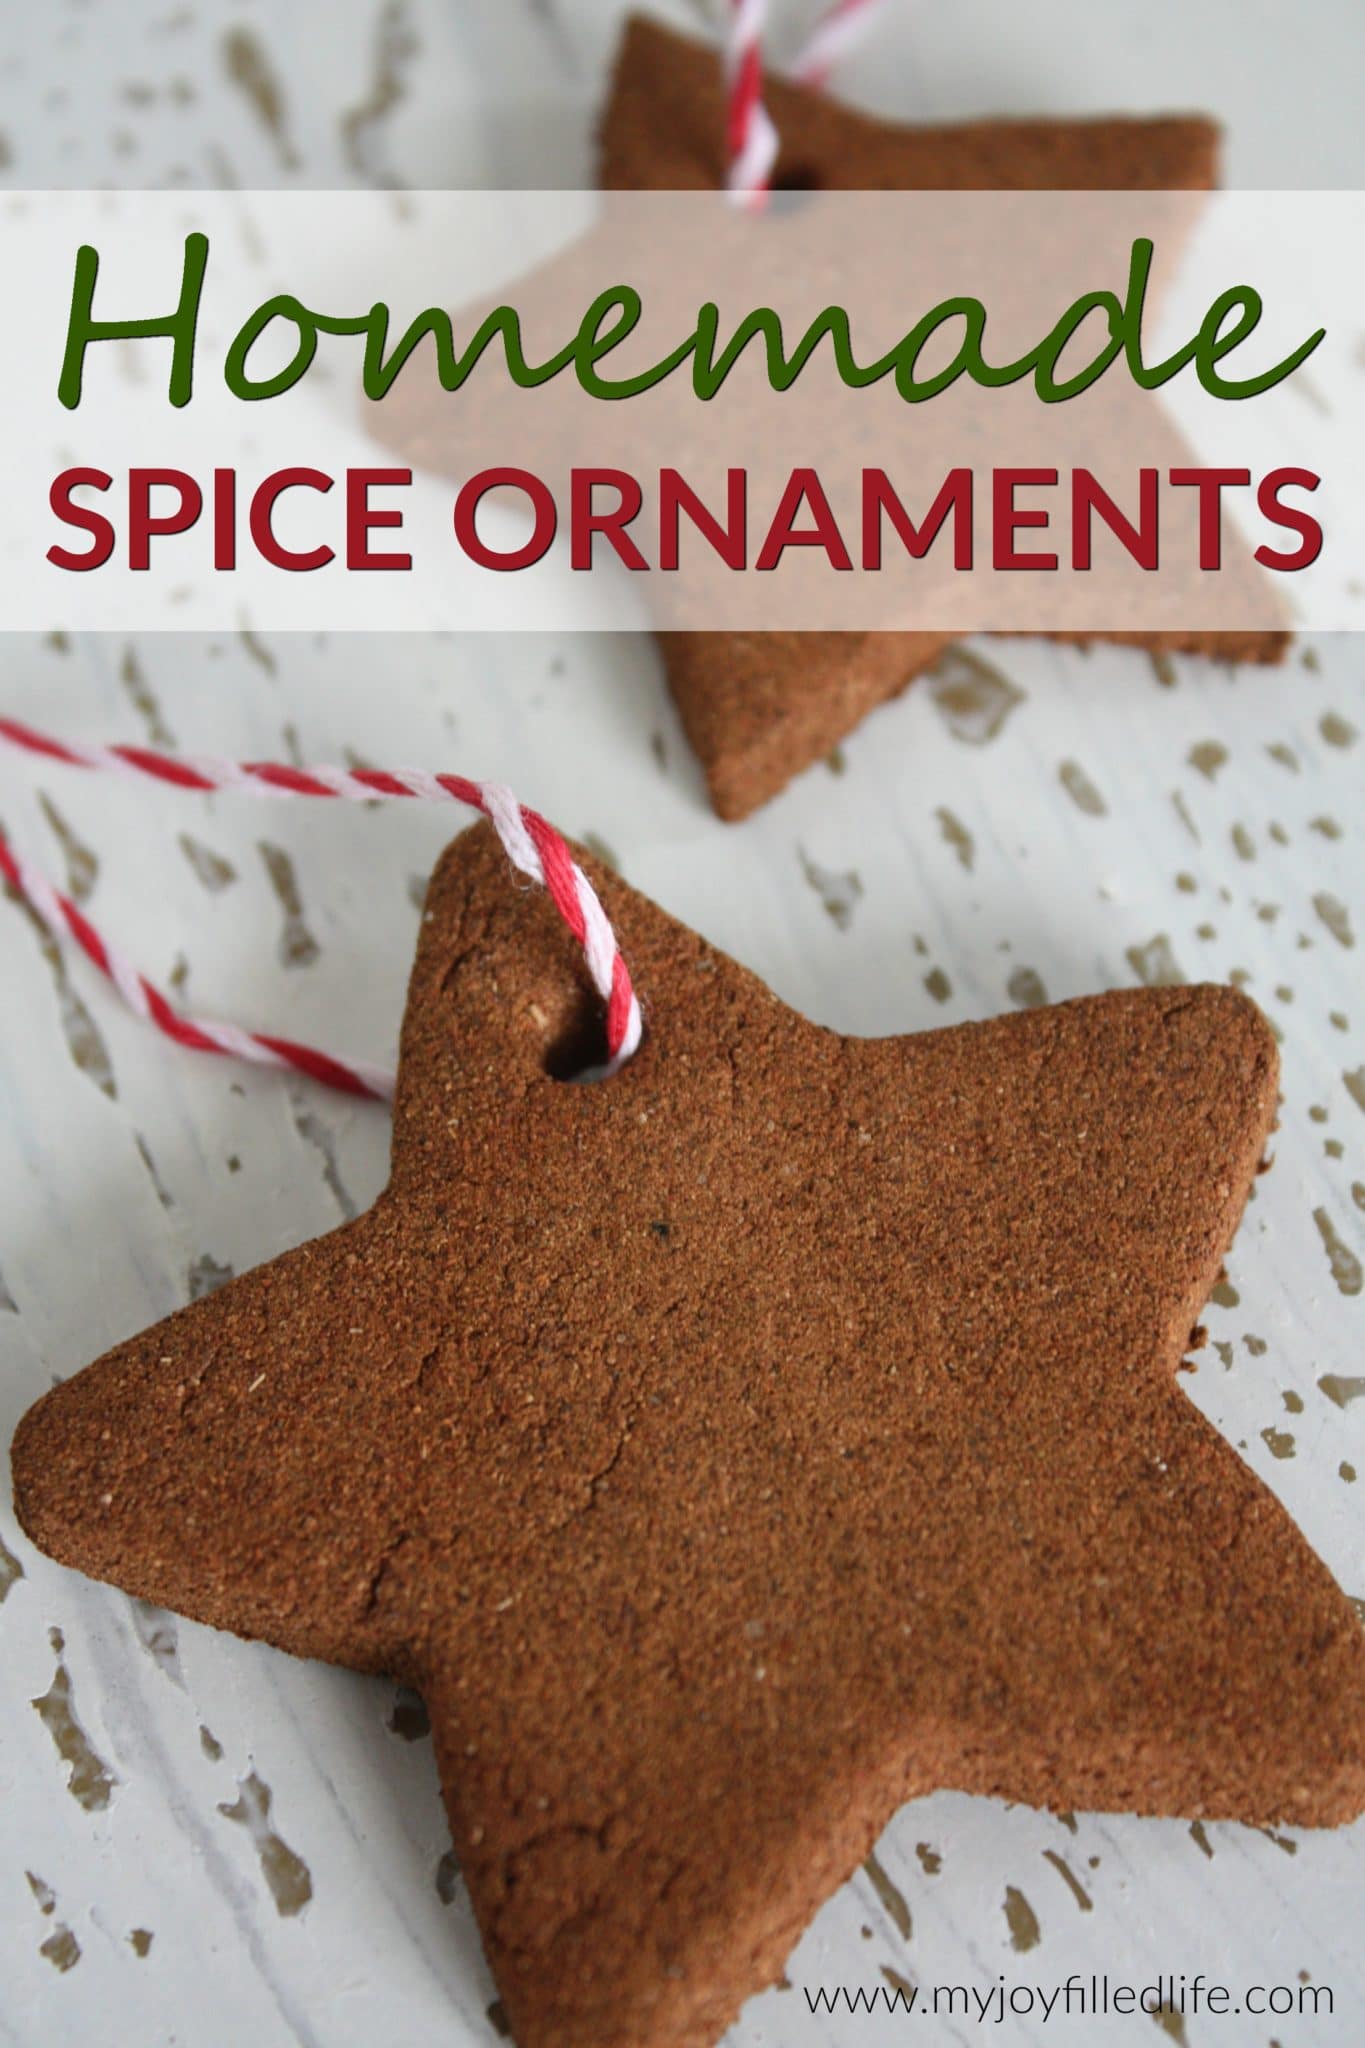 This homemade spice ornaments are fun and easy to make, not to mention they smell great - perfect for hanging on the tree or giving as a gift. 